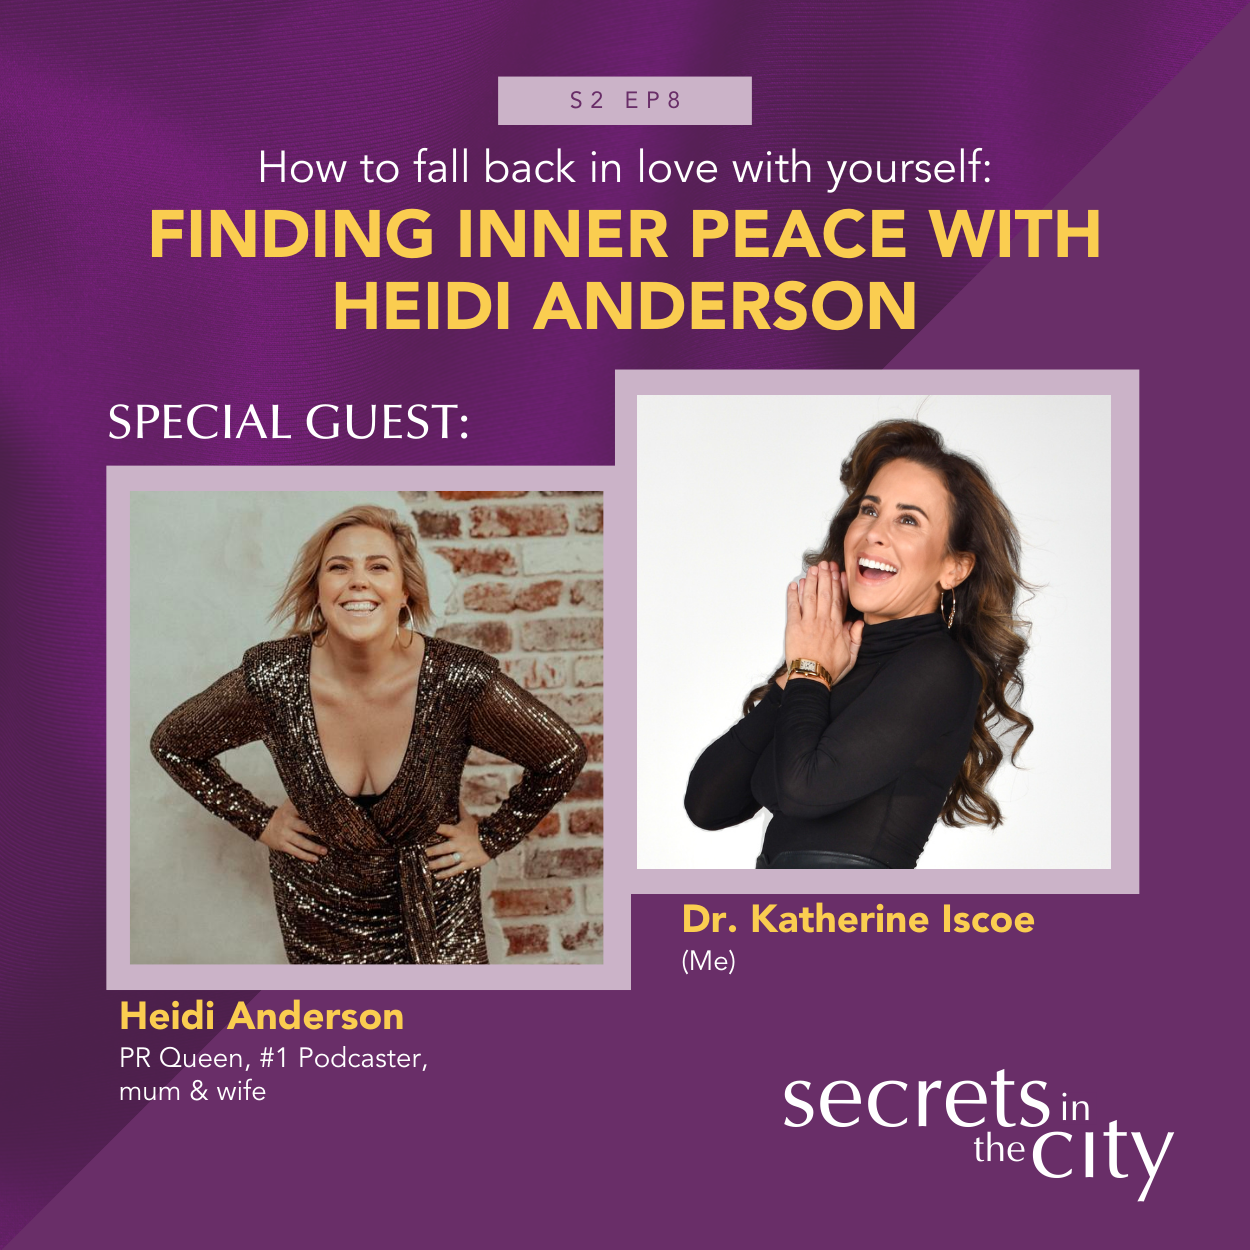 How to Fall Back in Love with Yourself: Finding Inner Peace with Heidi Anderson